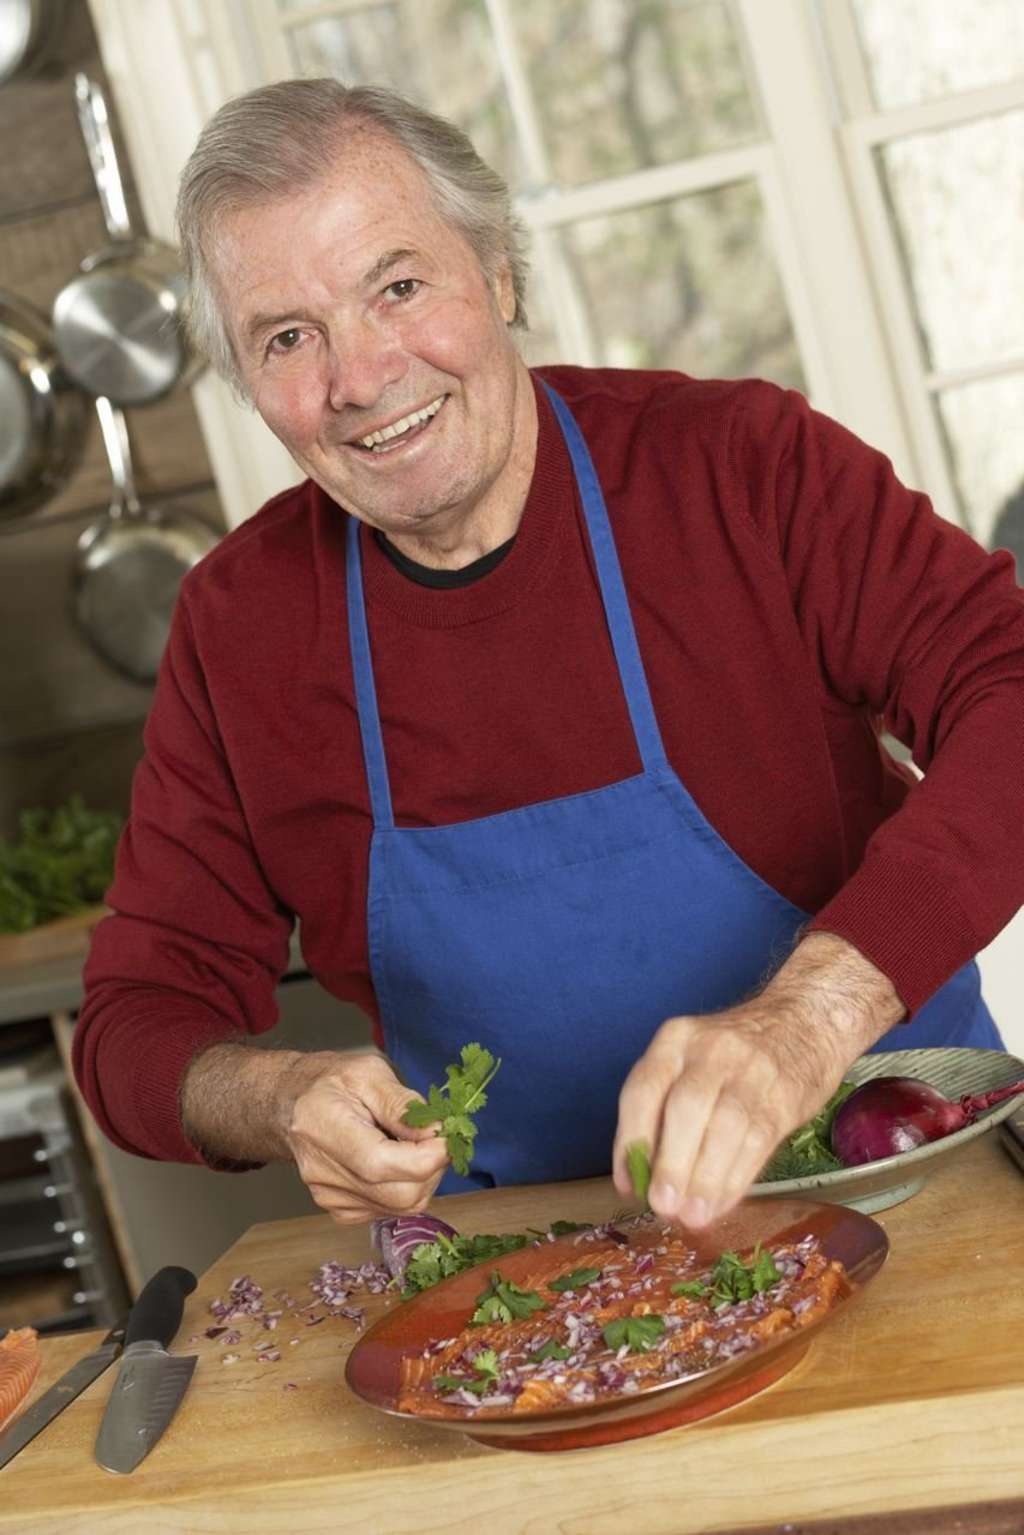 We Asked Jacques Pépin What He Makes for Dinner at Home | Kitchn